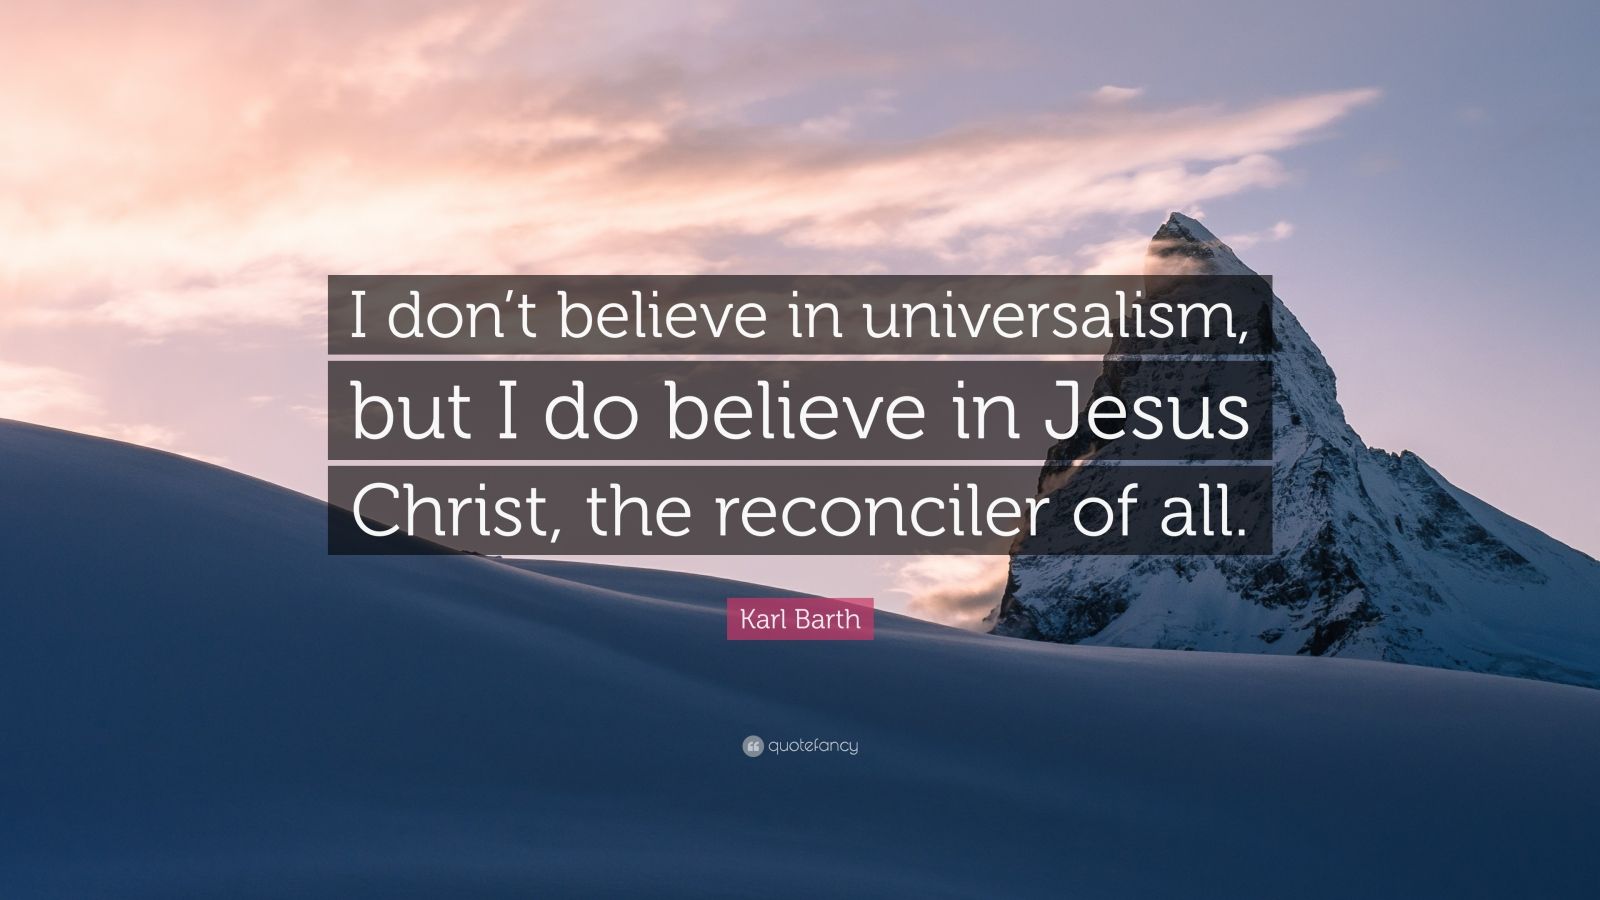 5486732-Karl-Barth-Quote-I-don-t-believe-in-universalism-but-I-do-believe.jpg